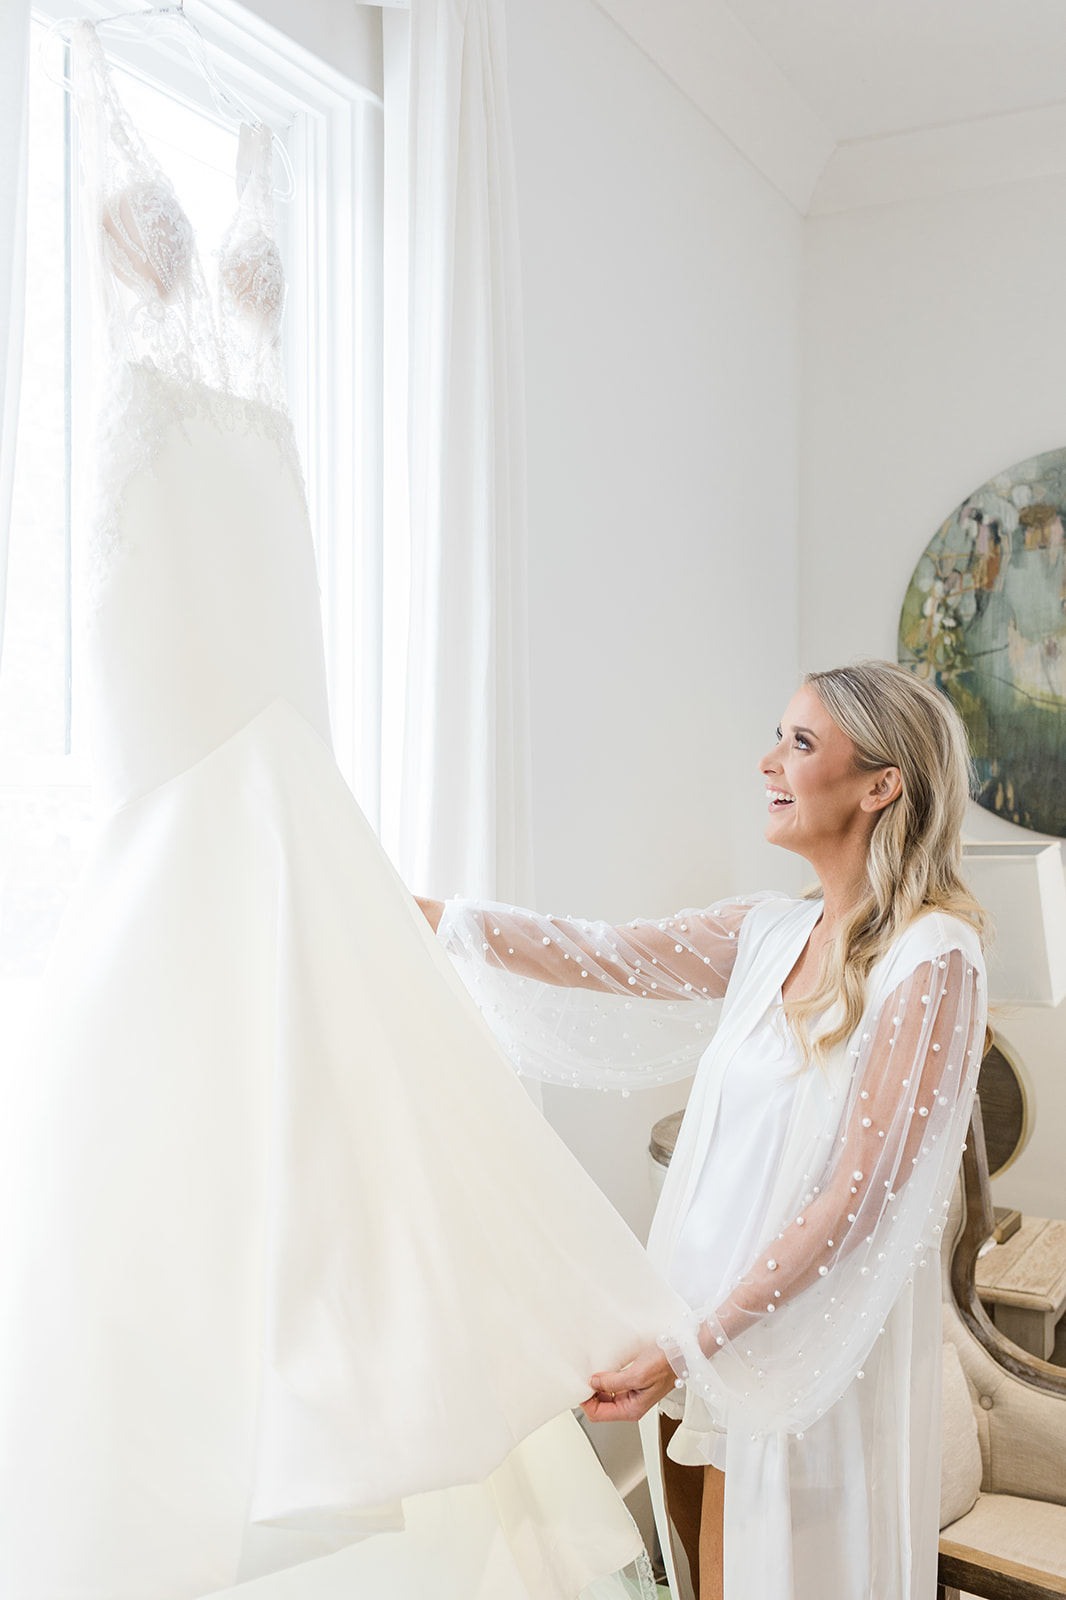 A blushing bride looks excitedly at her wedding gown in the glow of the natural sunlight through her bridal suite window